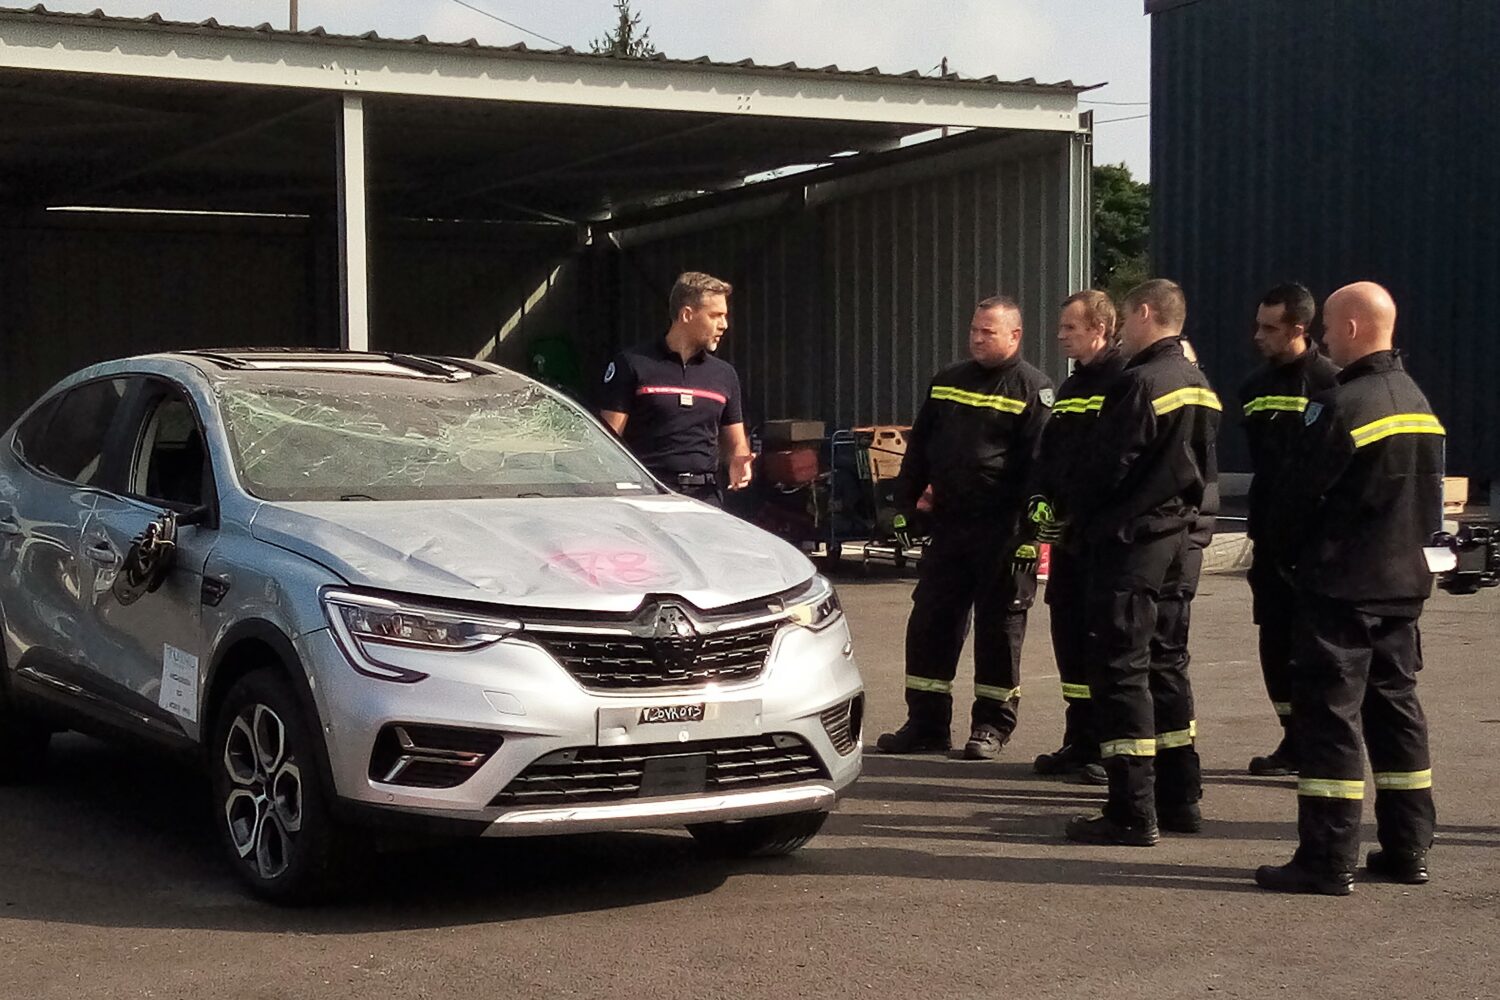 2021 - Story Renault group - A fireman in Renault Group engineering